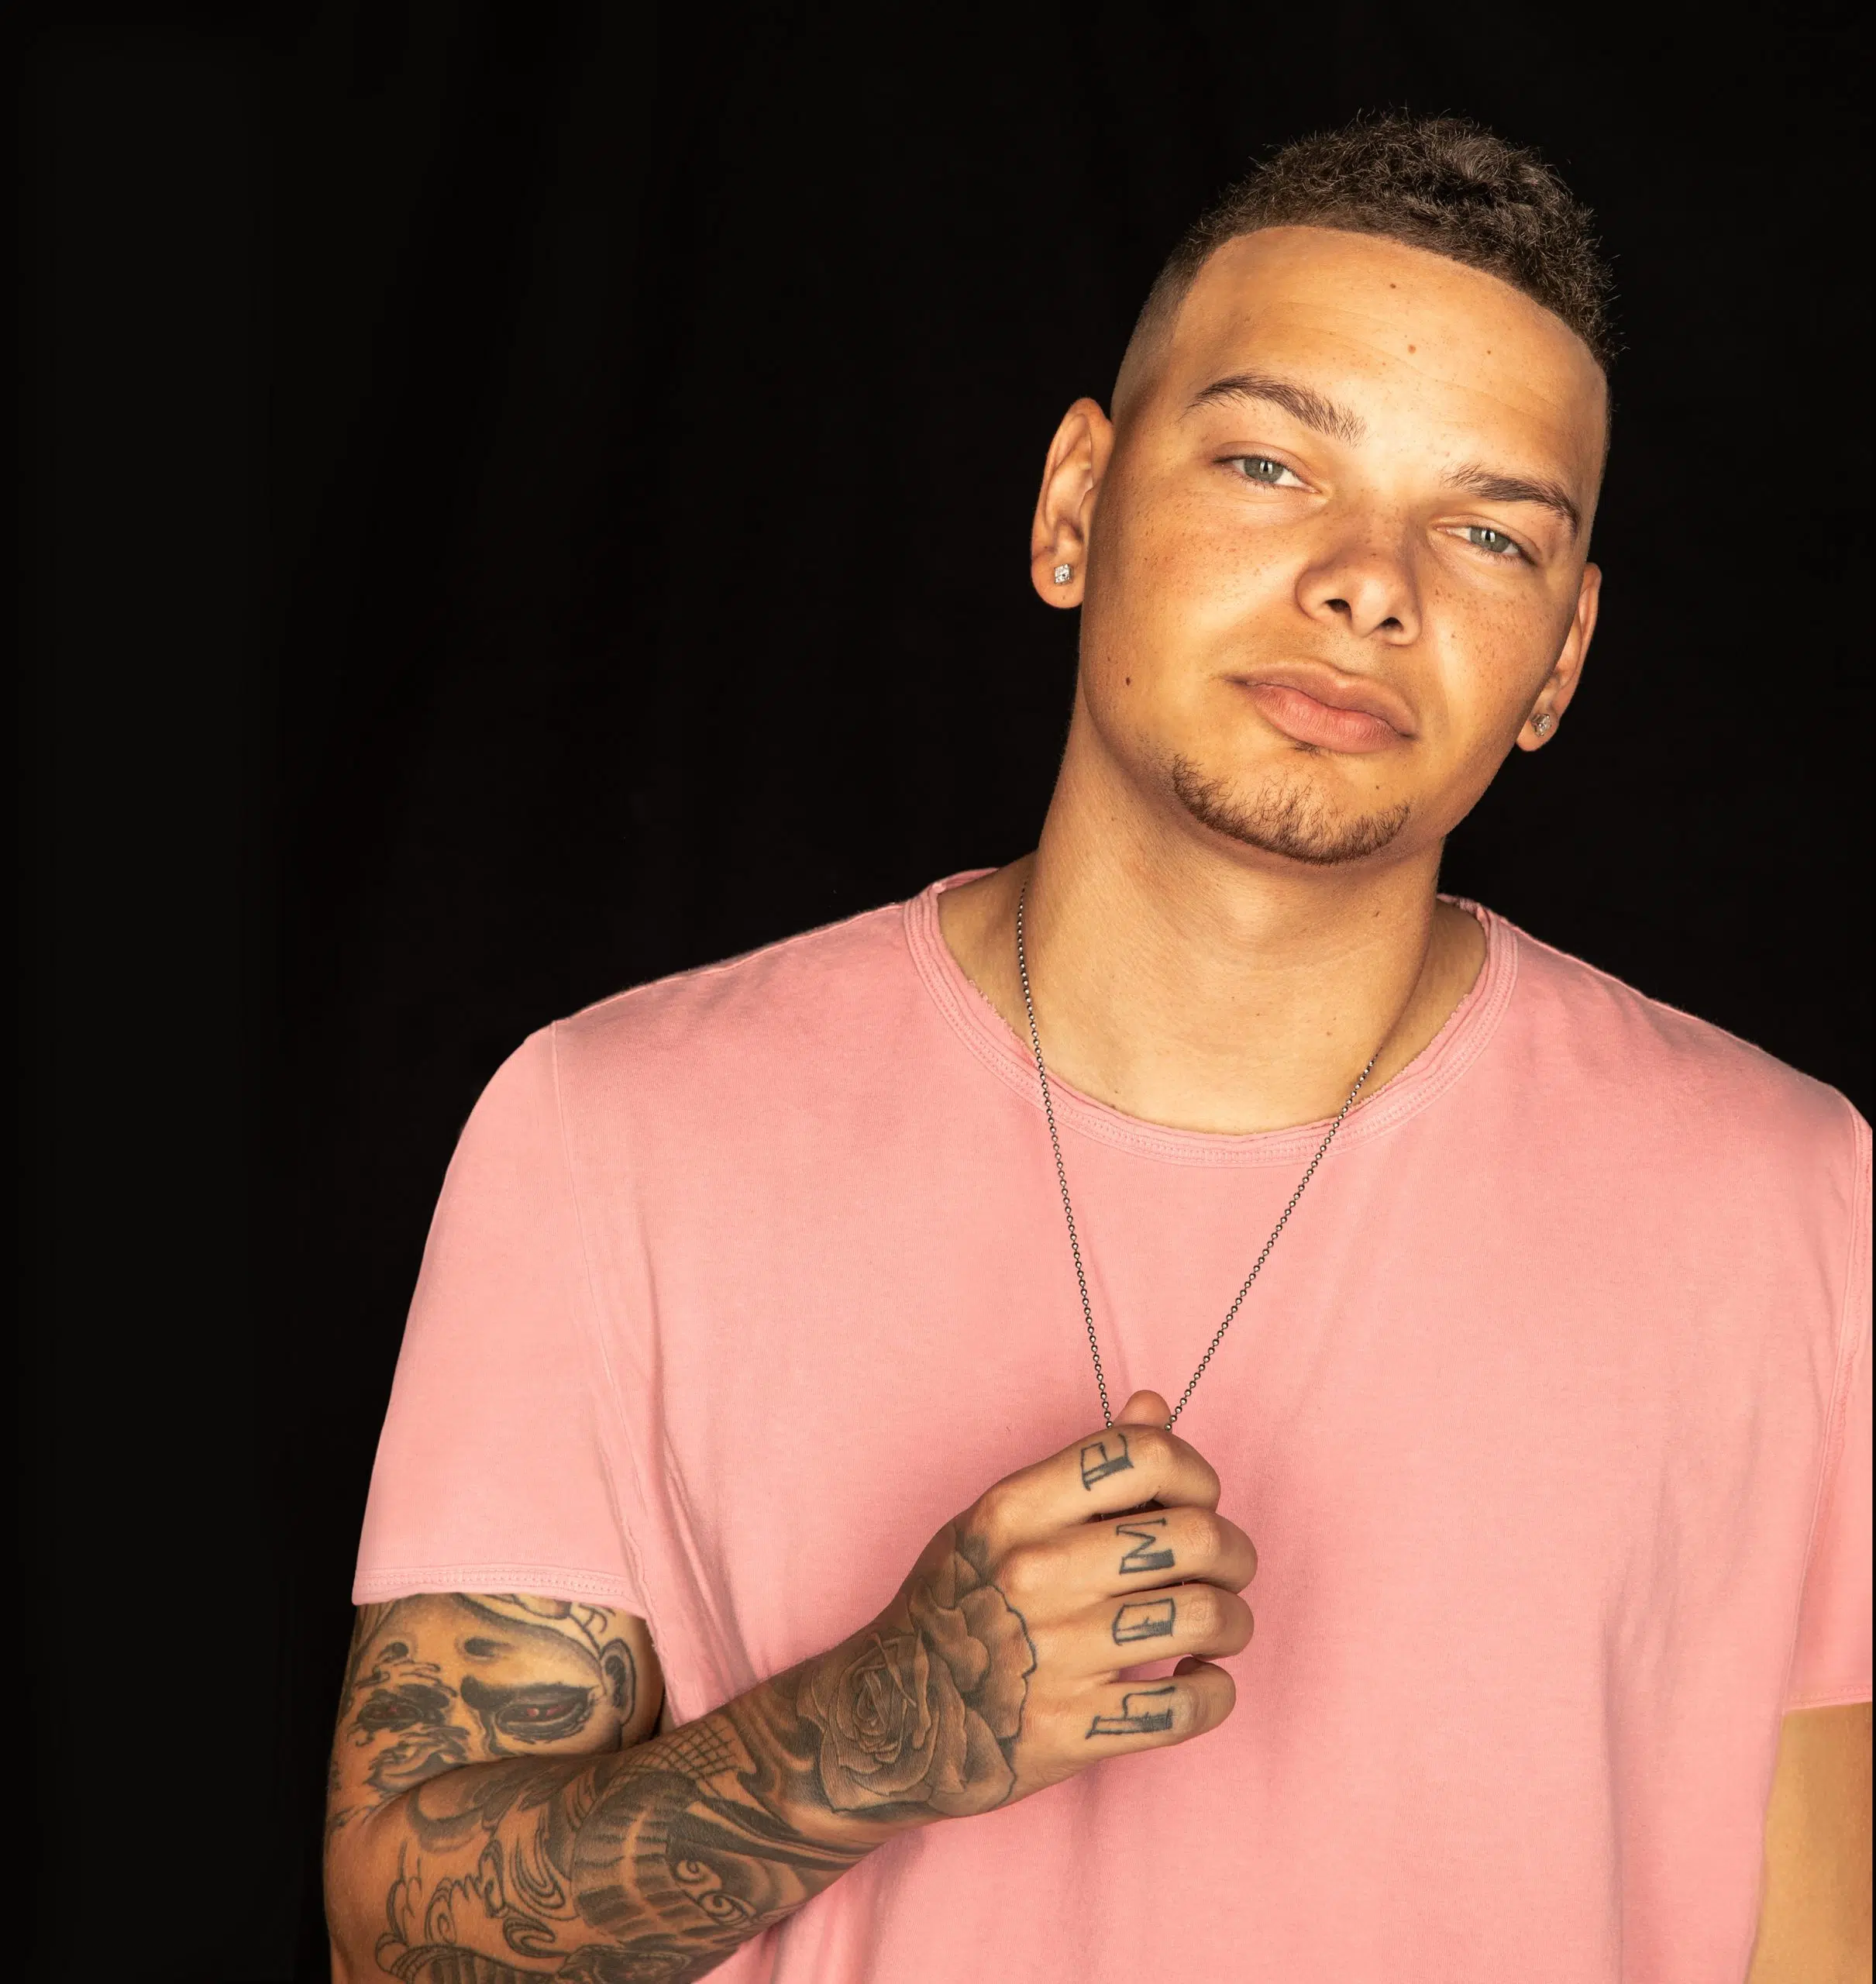 Go Country 105 - Kane Brown + his wife debut new tattoos they got for their  daughter Kodi Jane